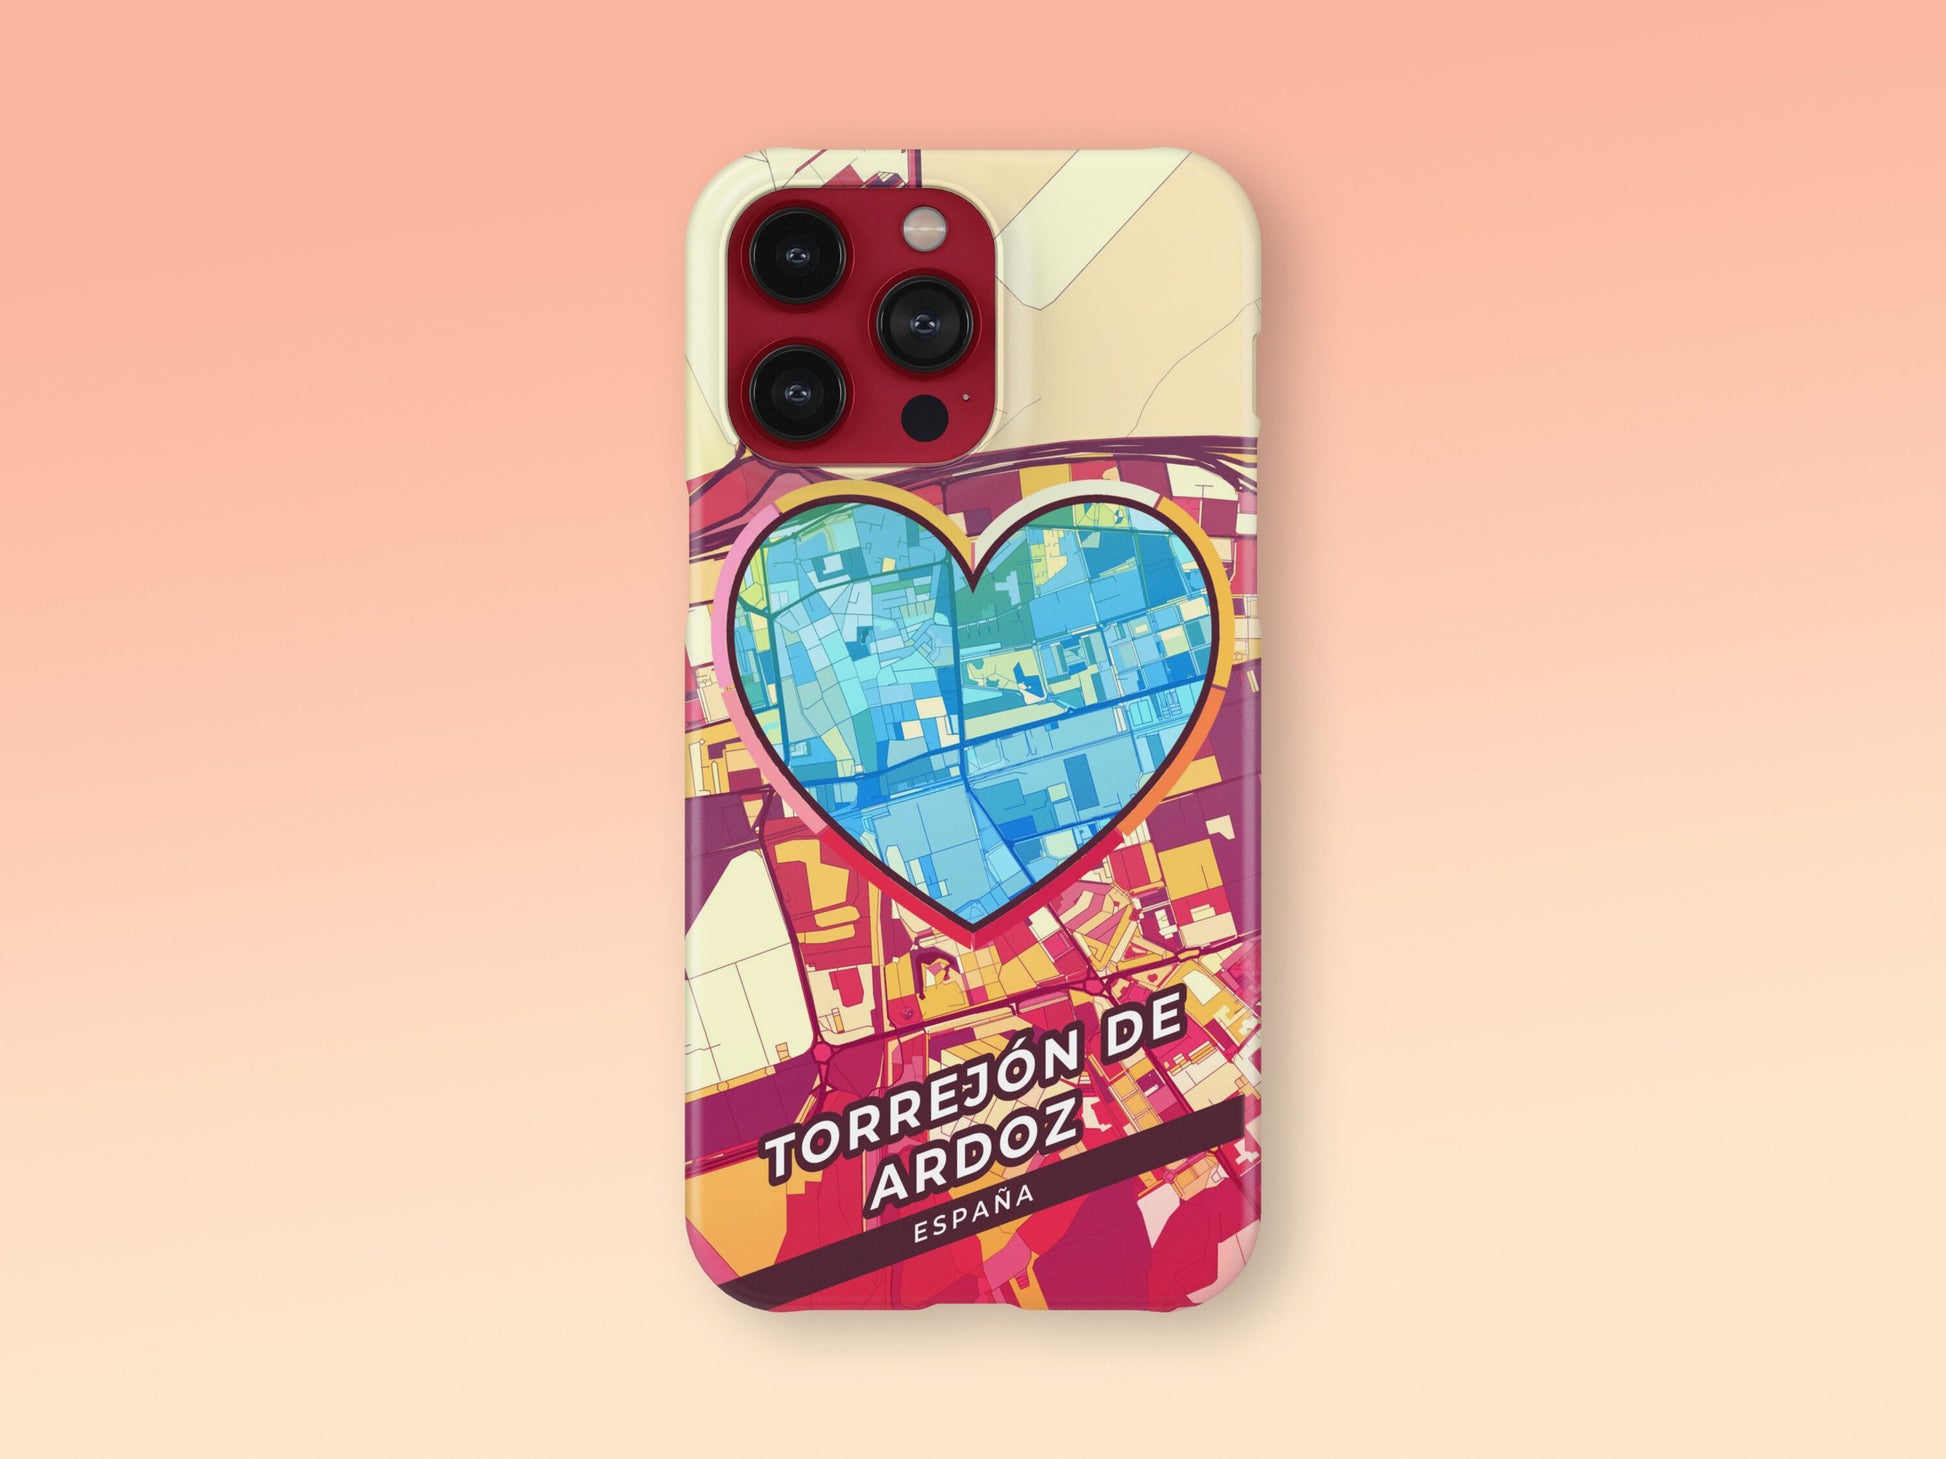 Torrejón De Ardoz Spain slim phone case with colorful icon. Birthday, wedding or housewarming gift. Couple match cases. 2